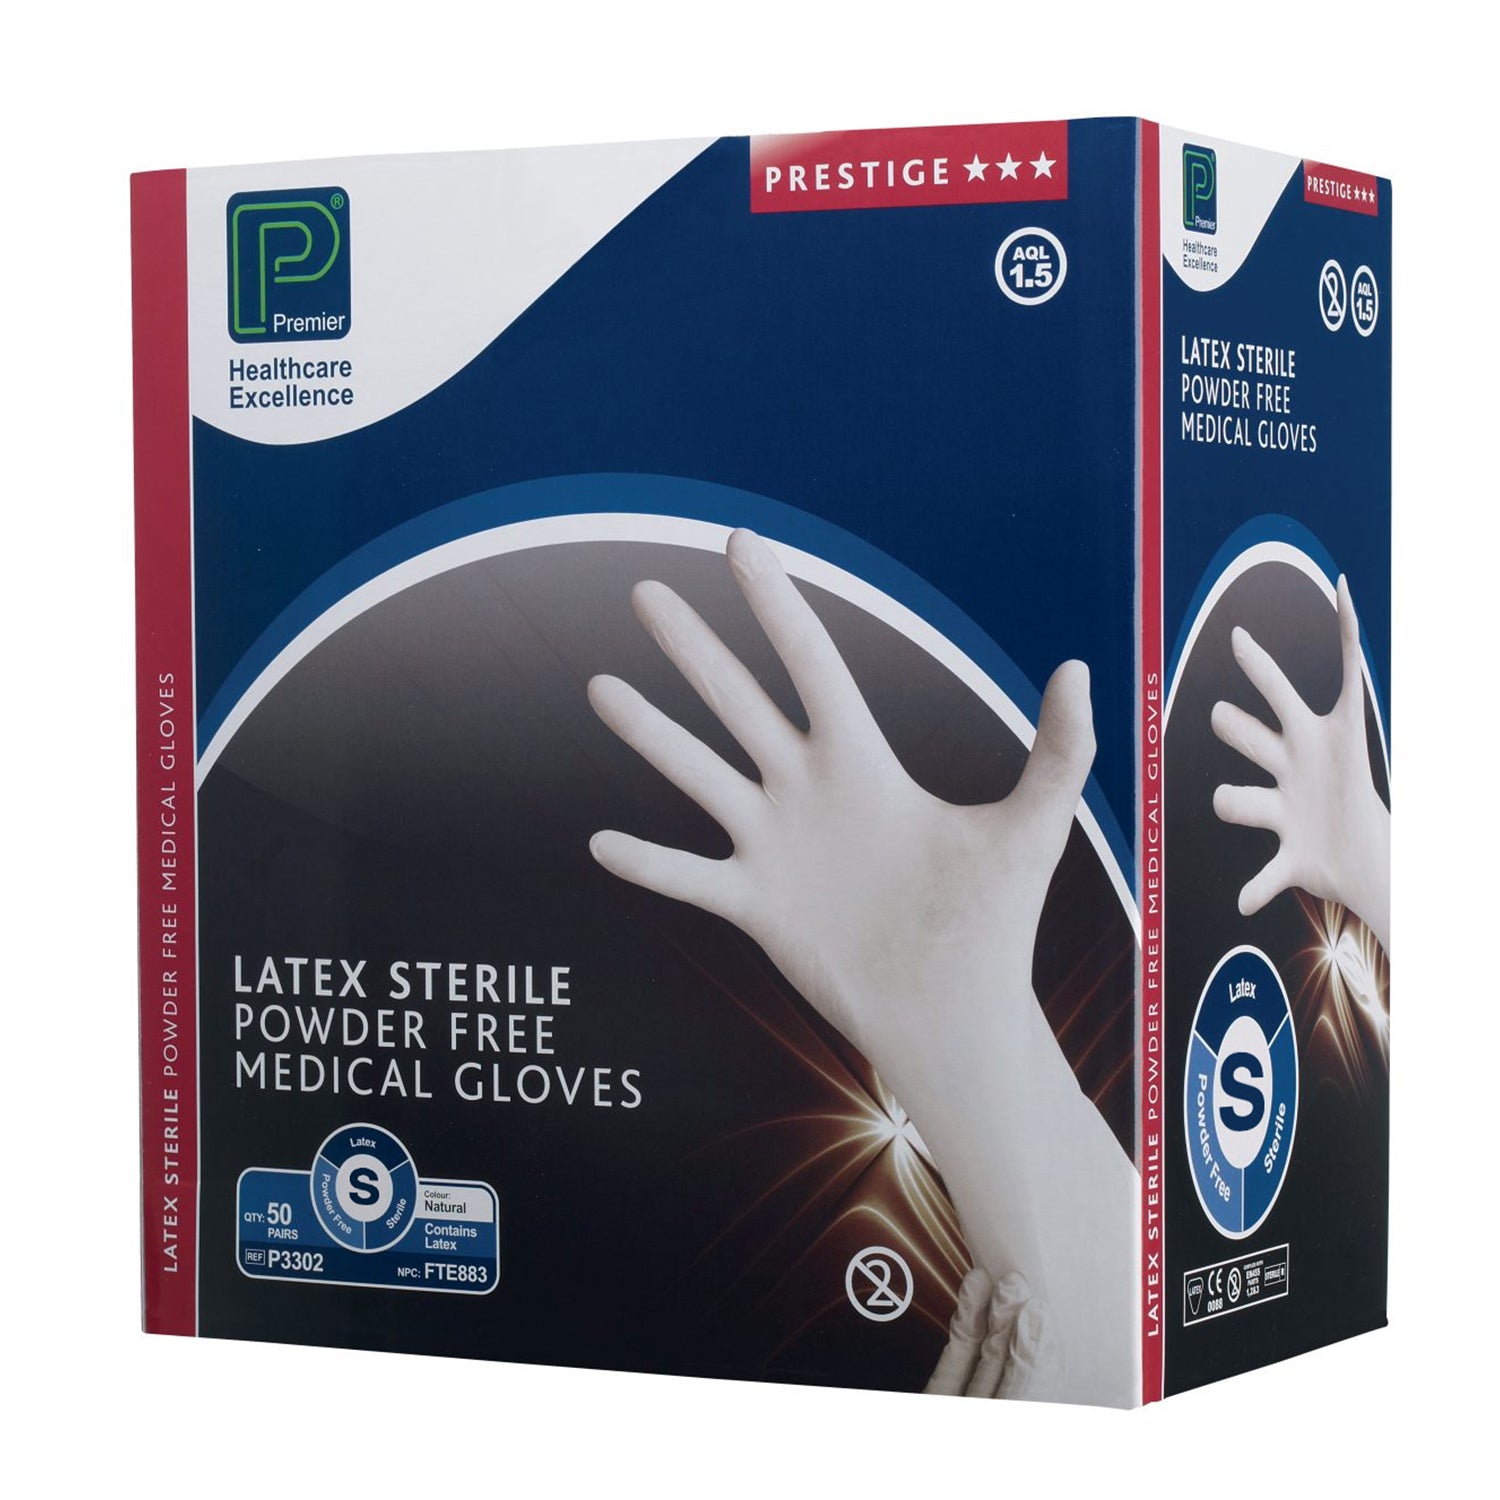 Premier Latex Sterile Powder Free Gloves | Small | Pack of 50 pairs